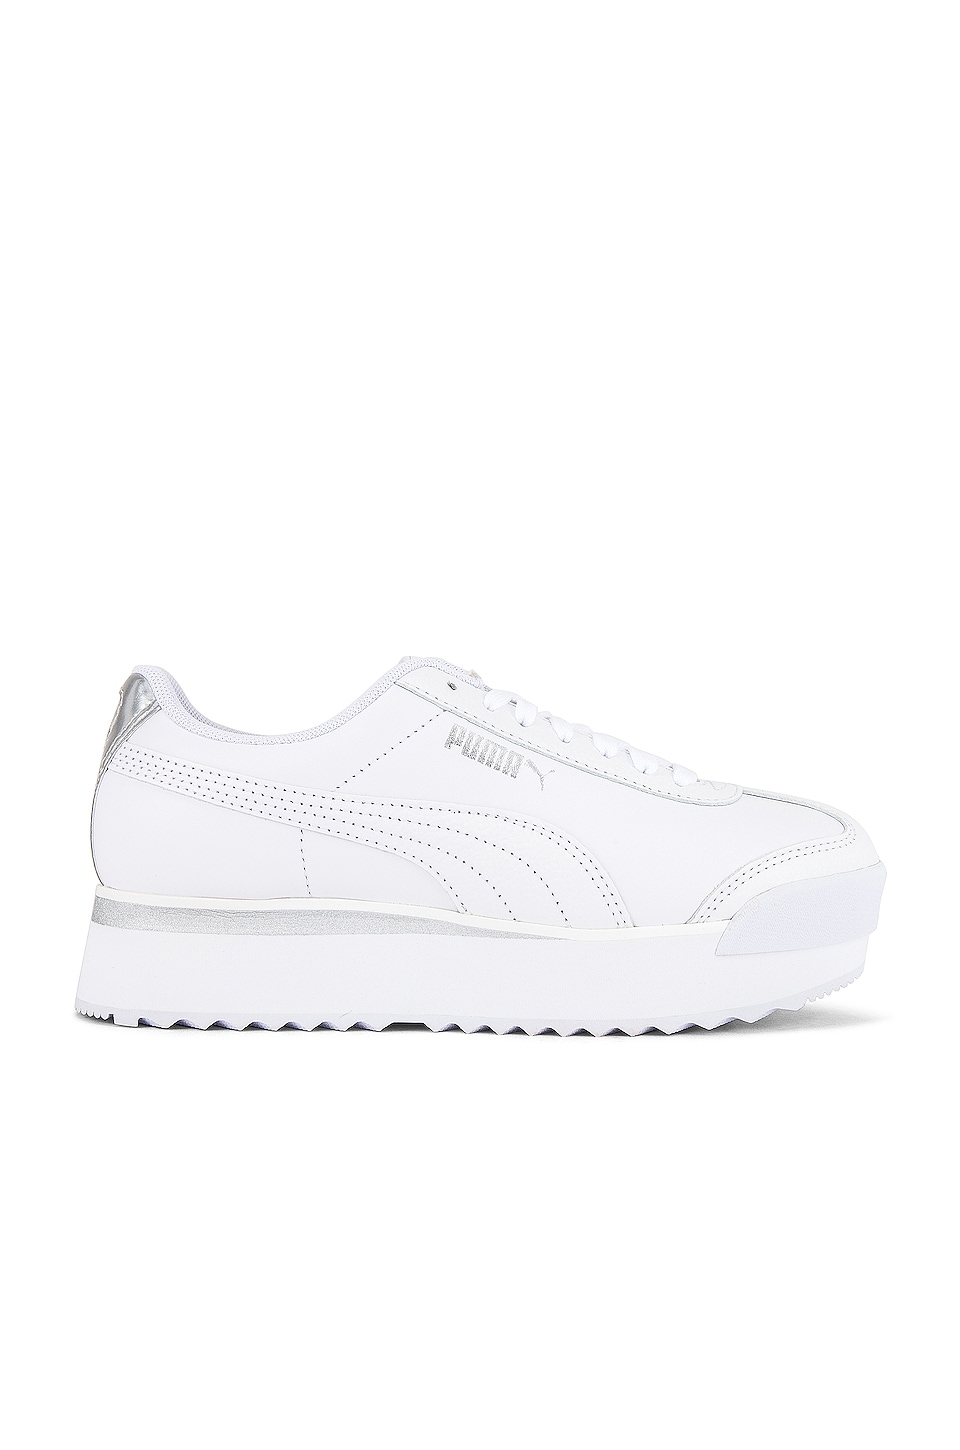 Puma Roma Amor Leather Suede Sneaker in 